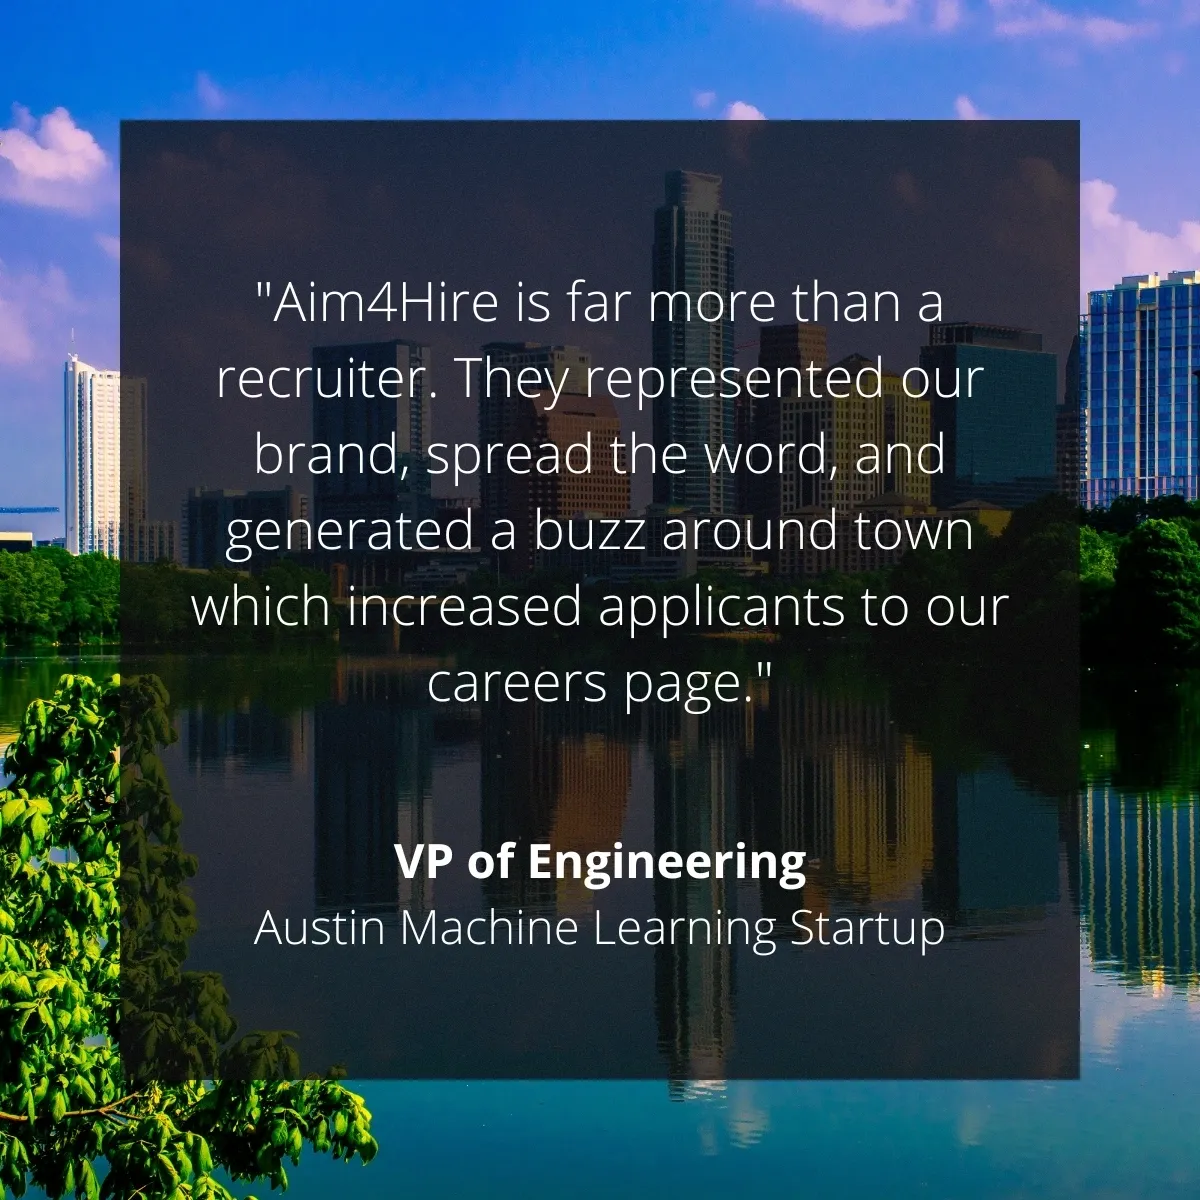 A quote from an engineer about hiring